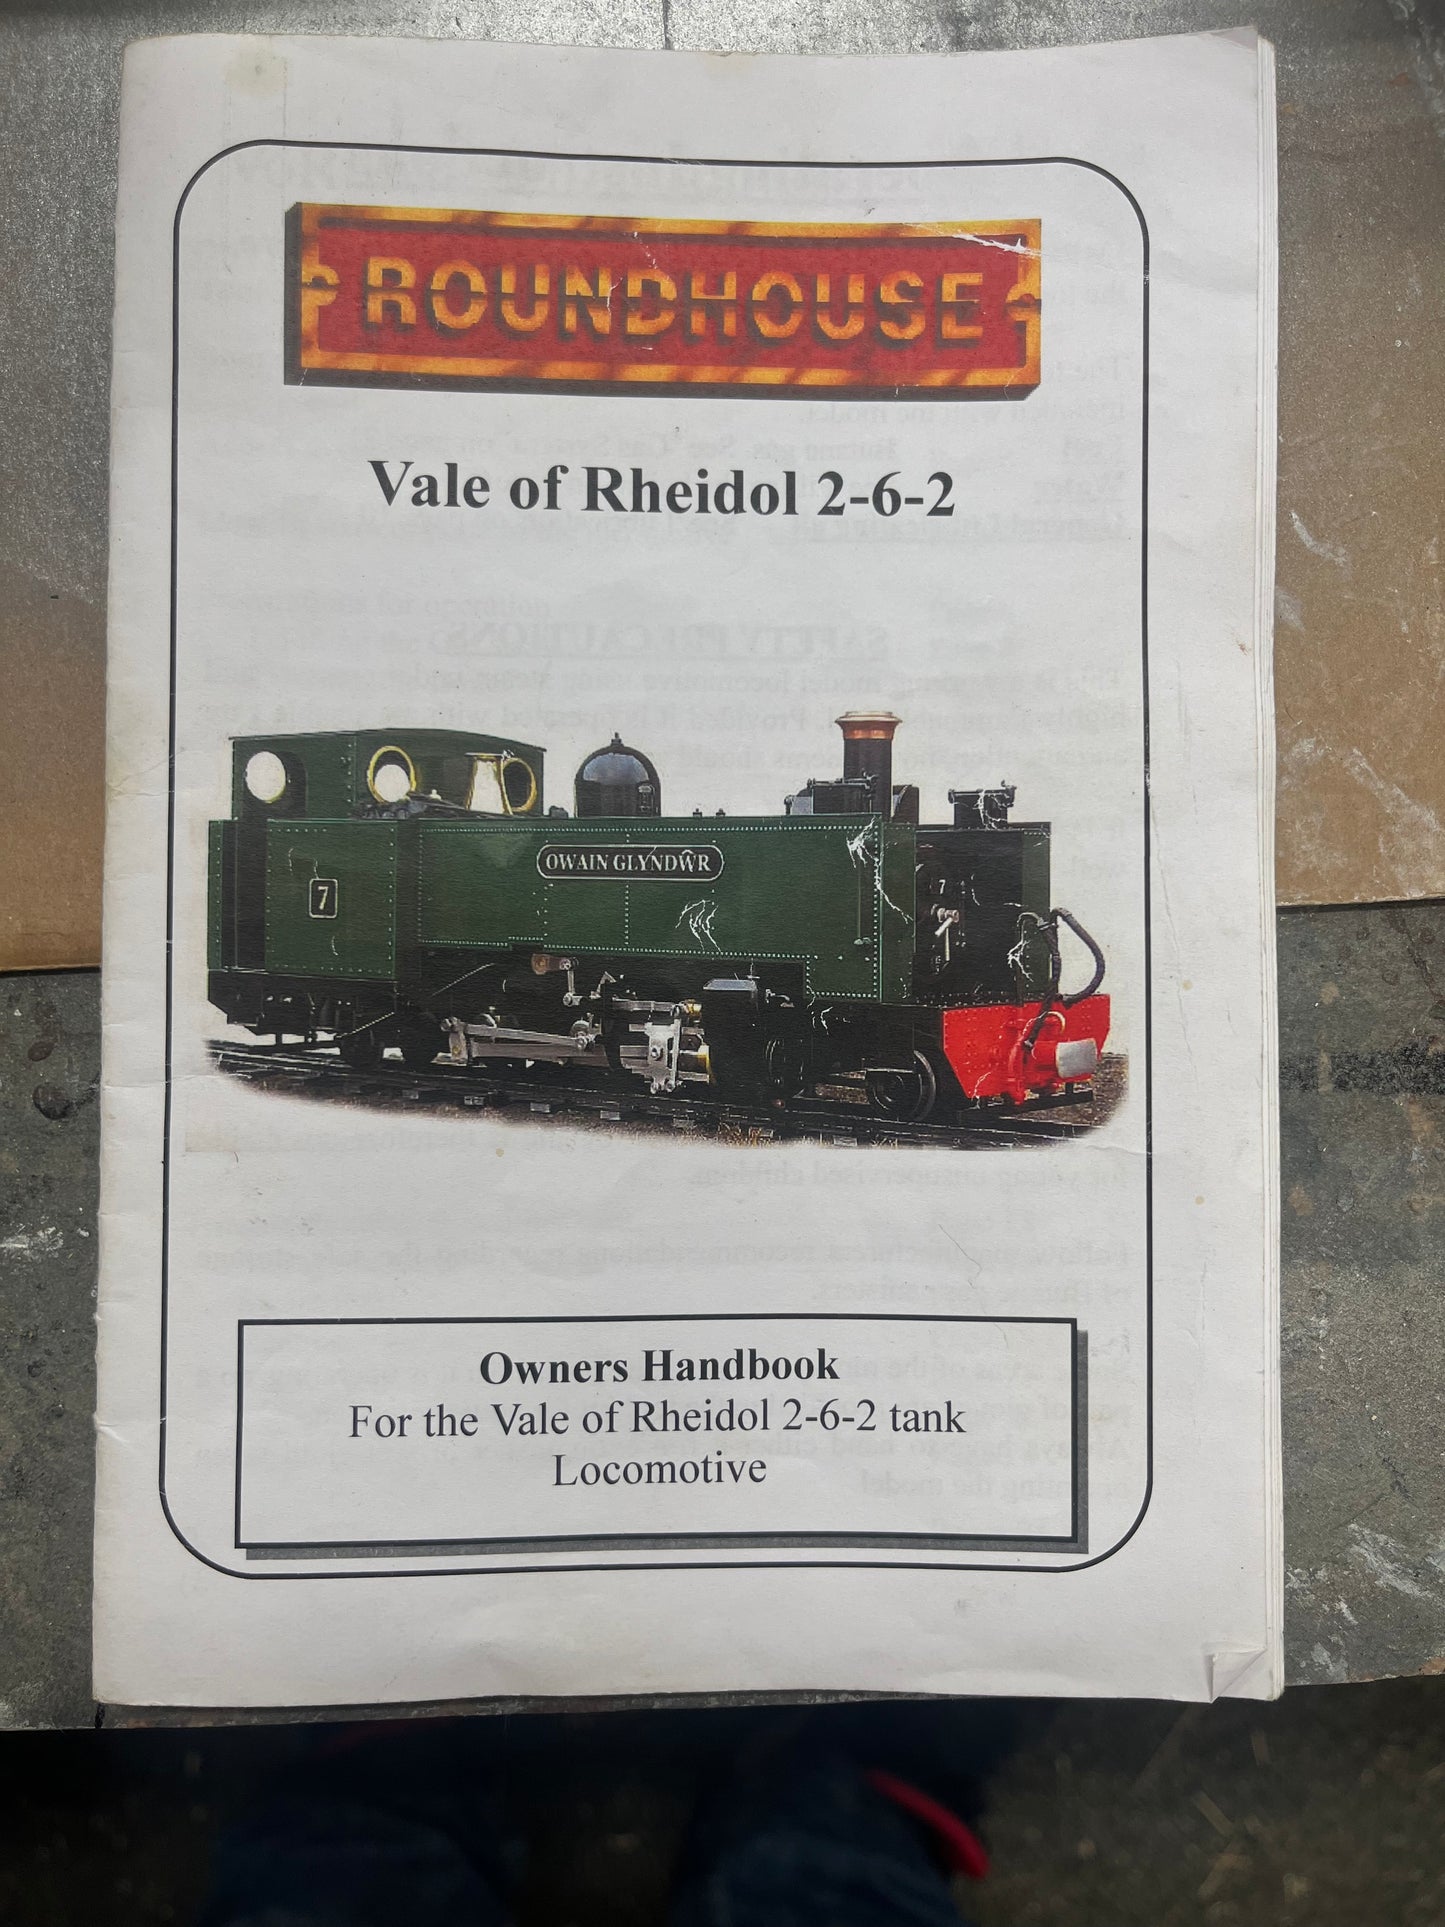 Roundhouse (32MM / O Gauge) Ex Great Western Railway / Vale of Rheidol 2-6-2 No.9 “Prince of Wales” in unlined BR Green (Shed code 89C Aberystwyth)